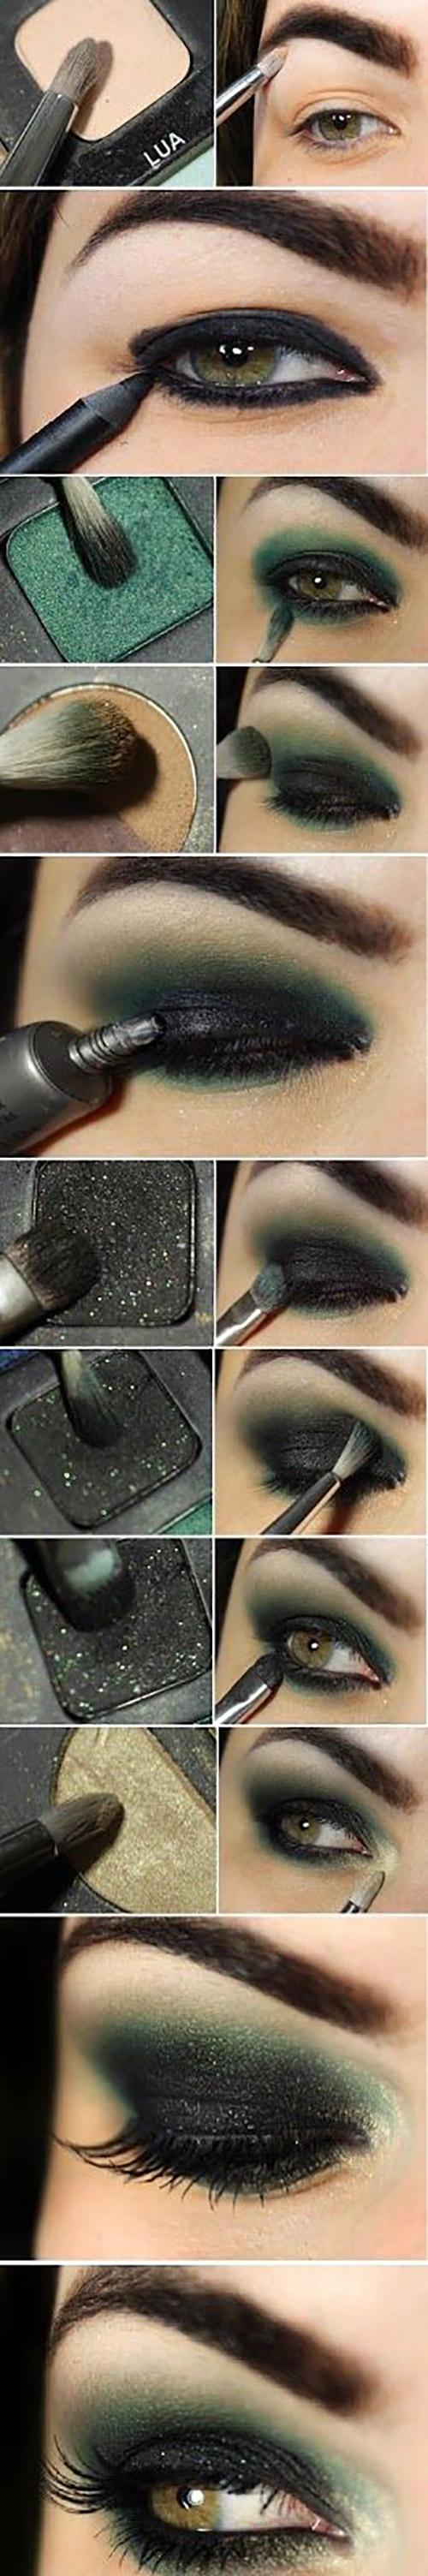 Green Cat Eye Makeup How To Do Smokey Eye Makeup Top 10 Tutorial Pictures For 2019